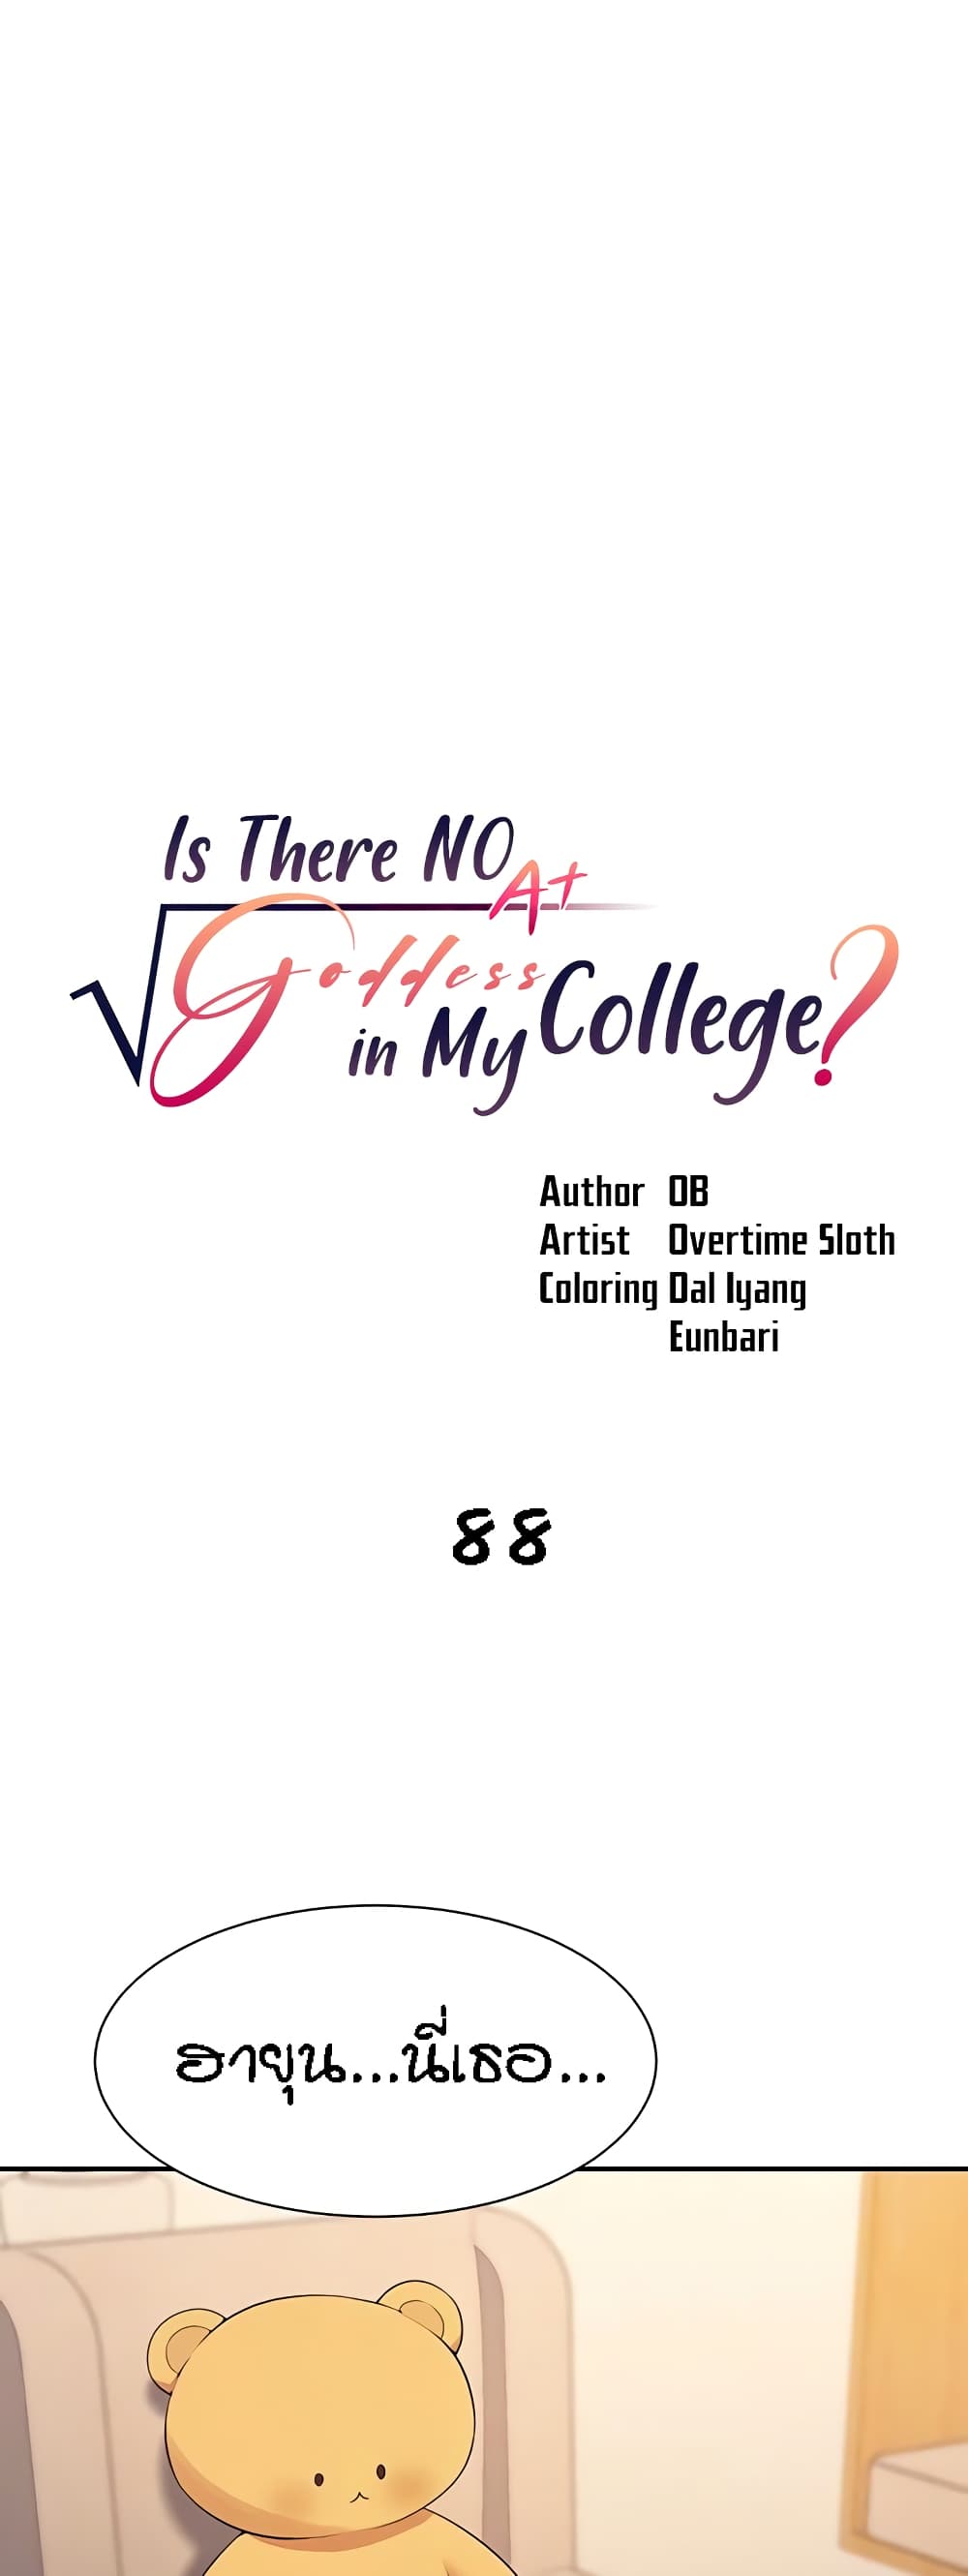 Is There No Goddess in My College 88 (1)